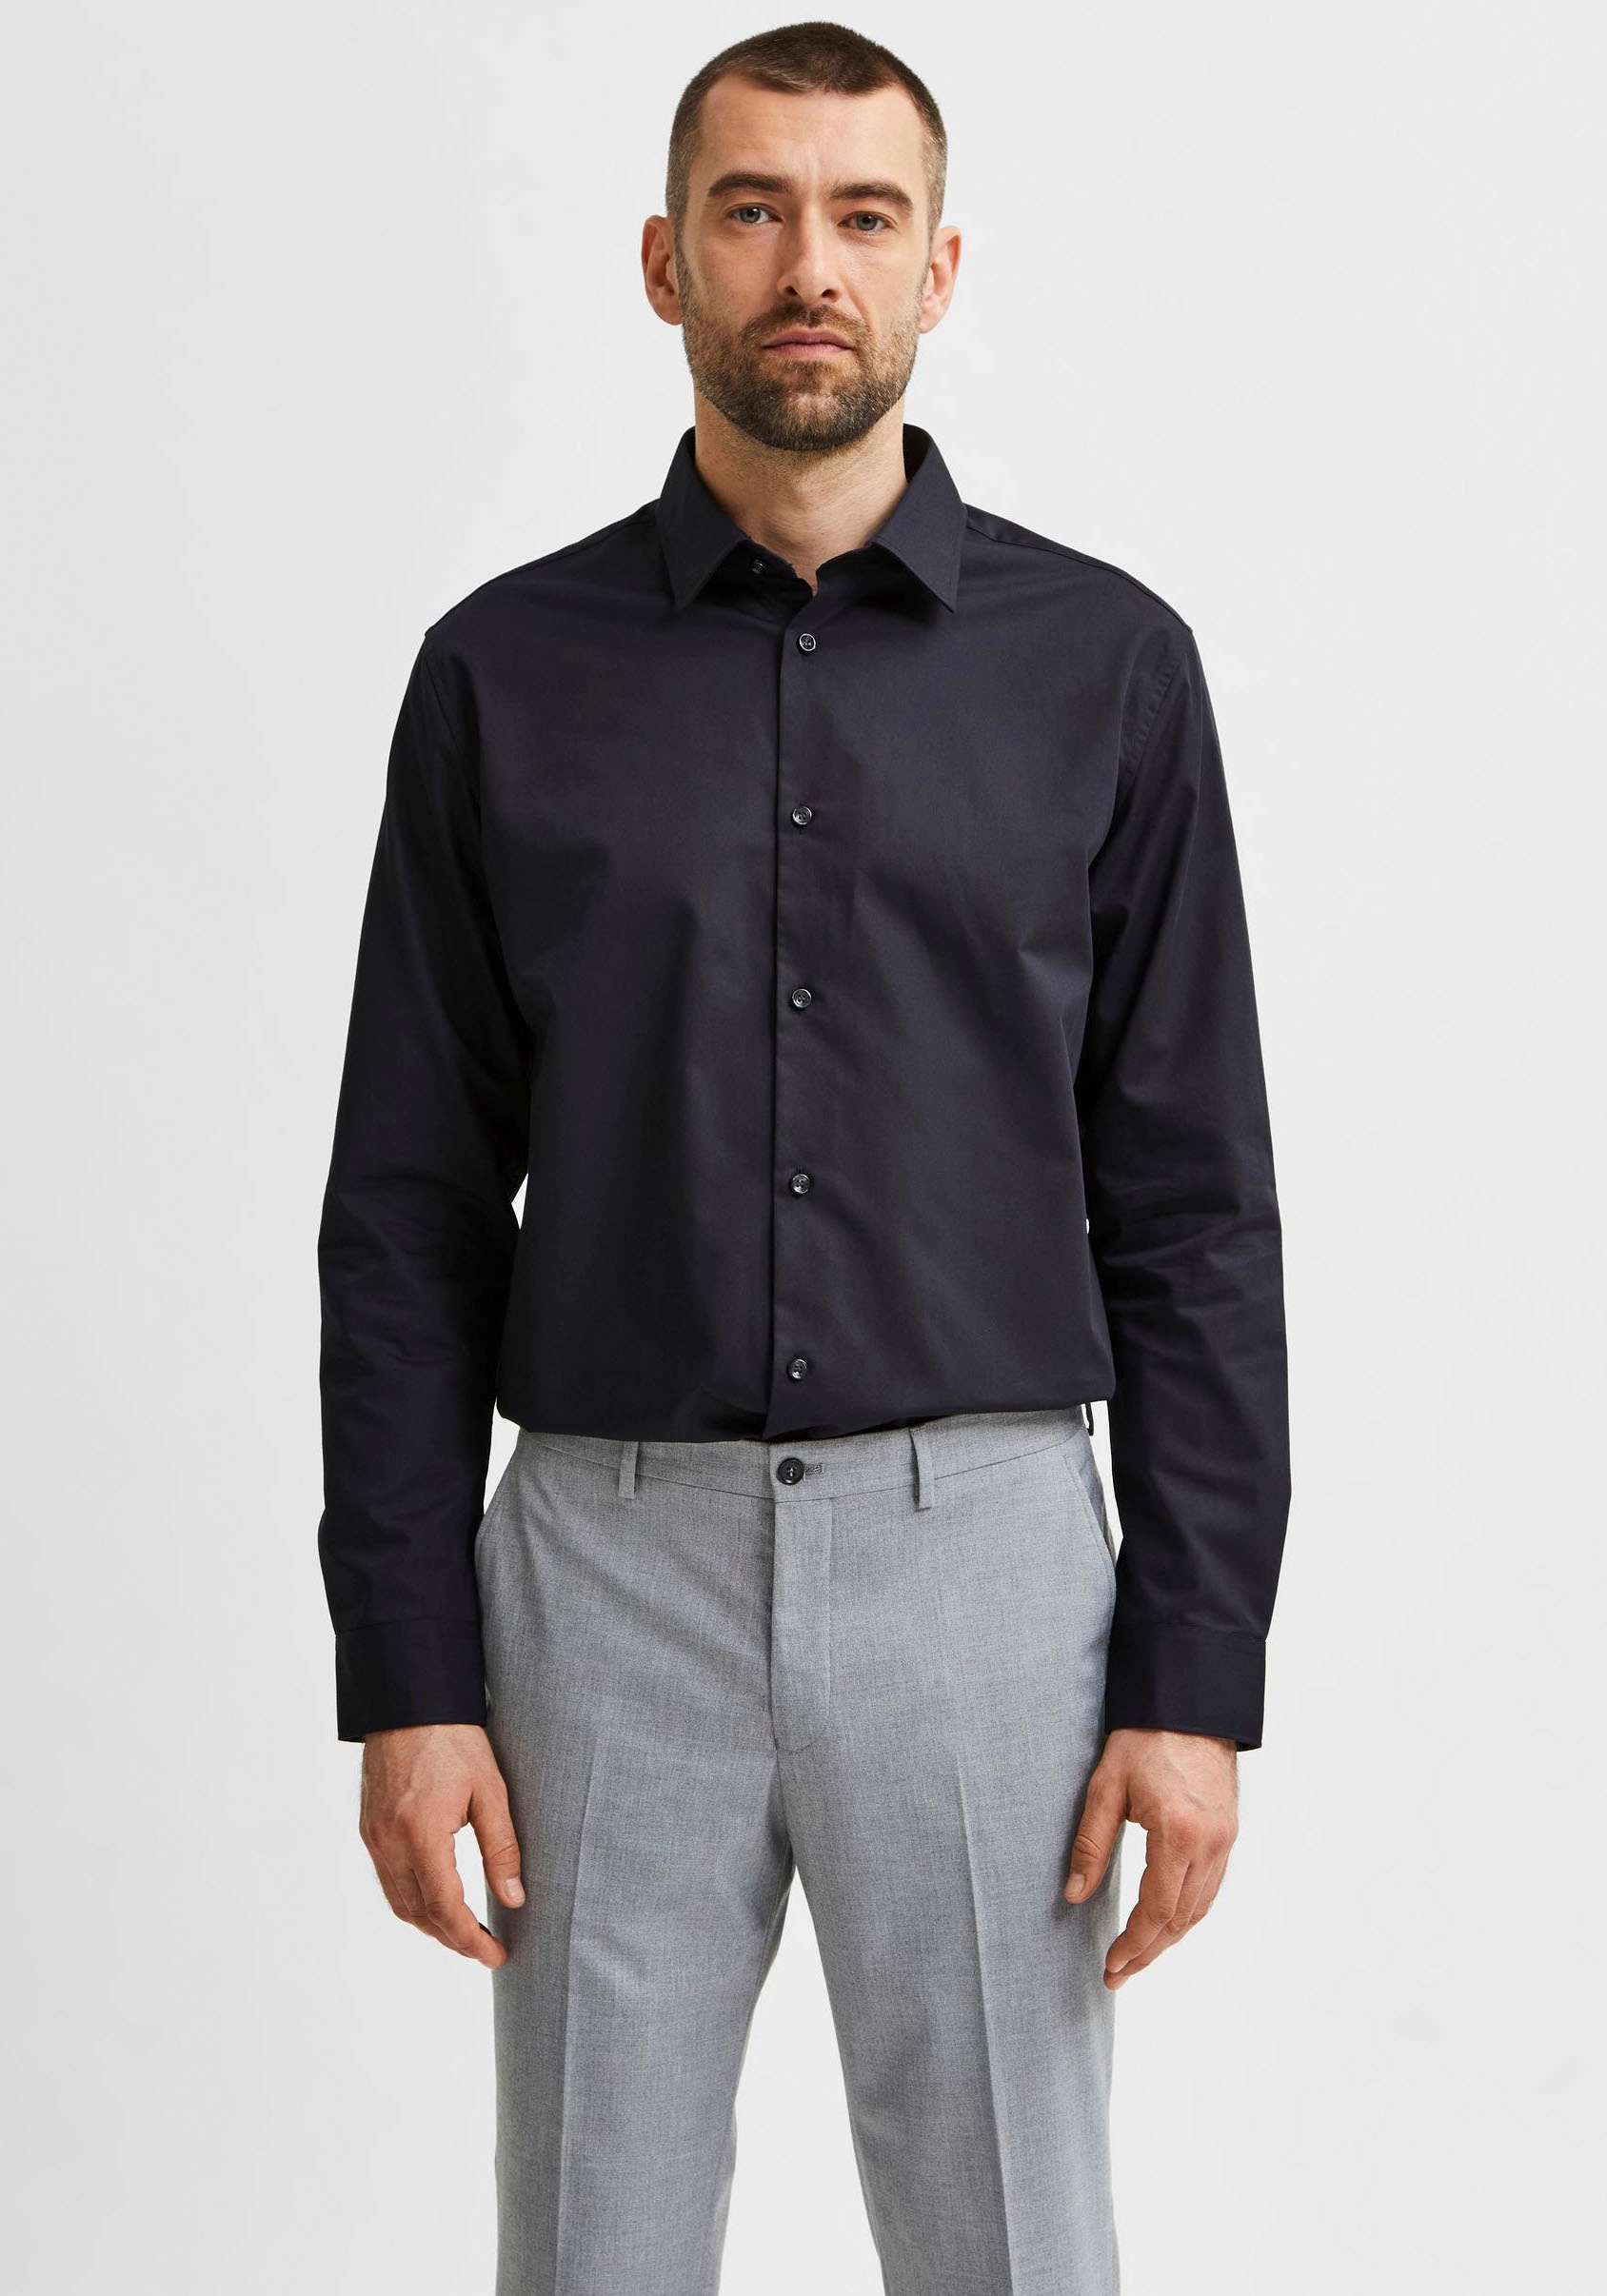 SELECTED HOMME online OTTO kaufen »SLHSLIMETHAN SHIRT« bei Businesshemd